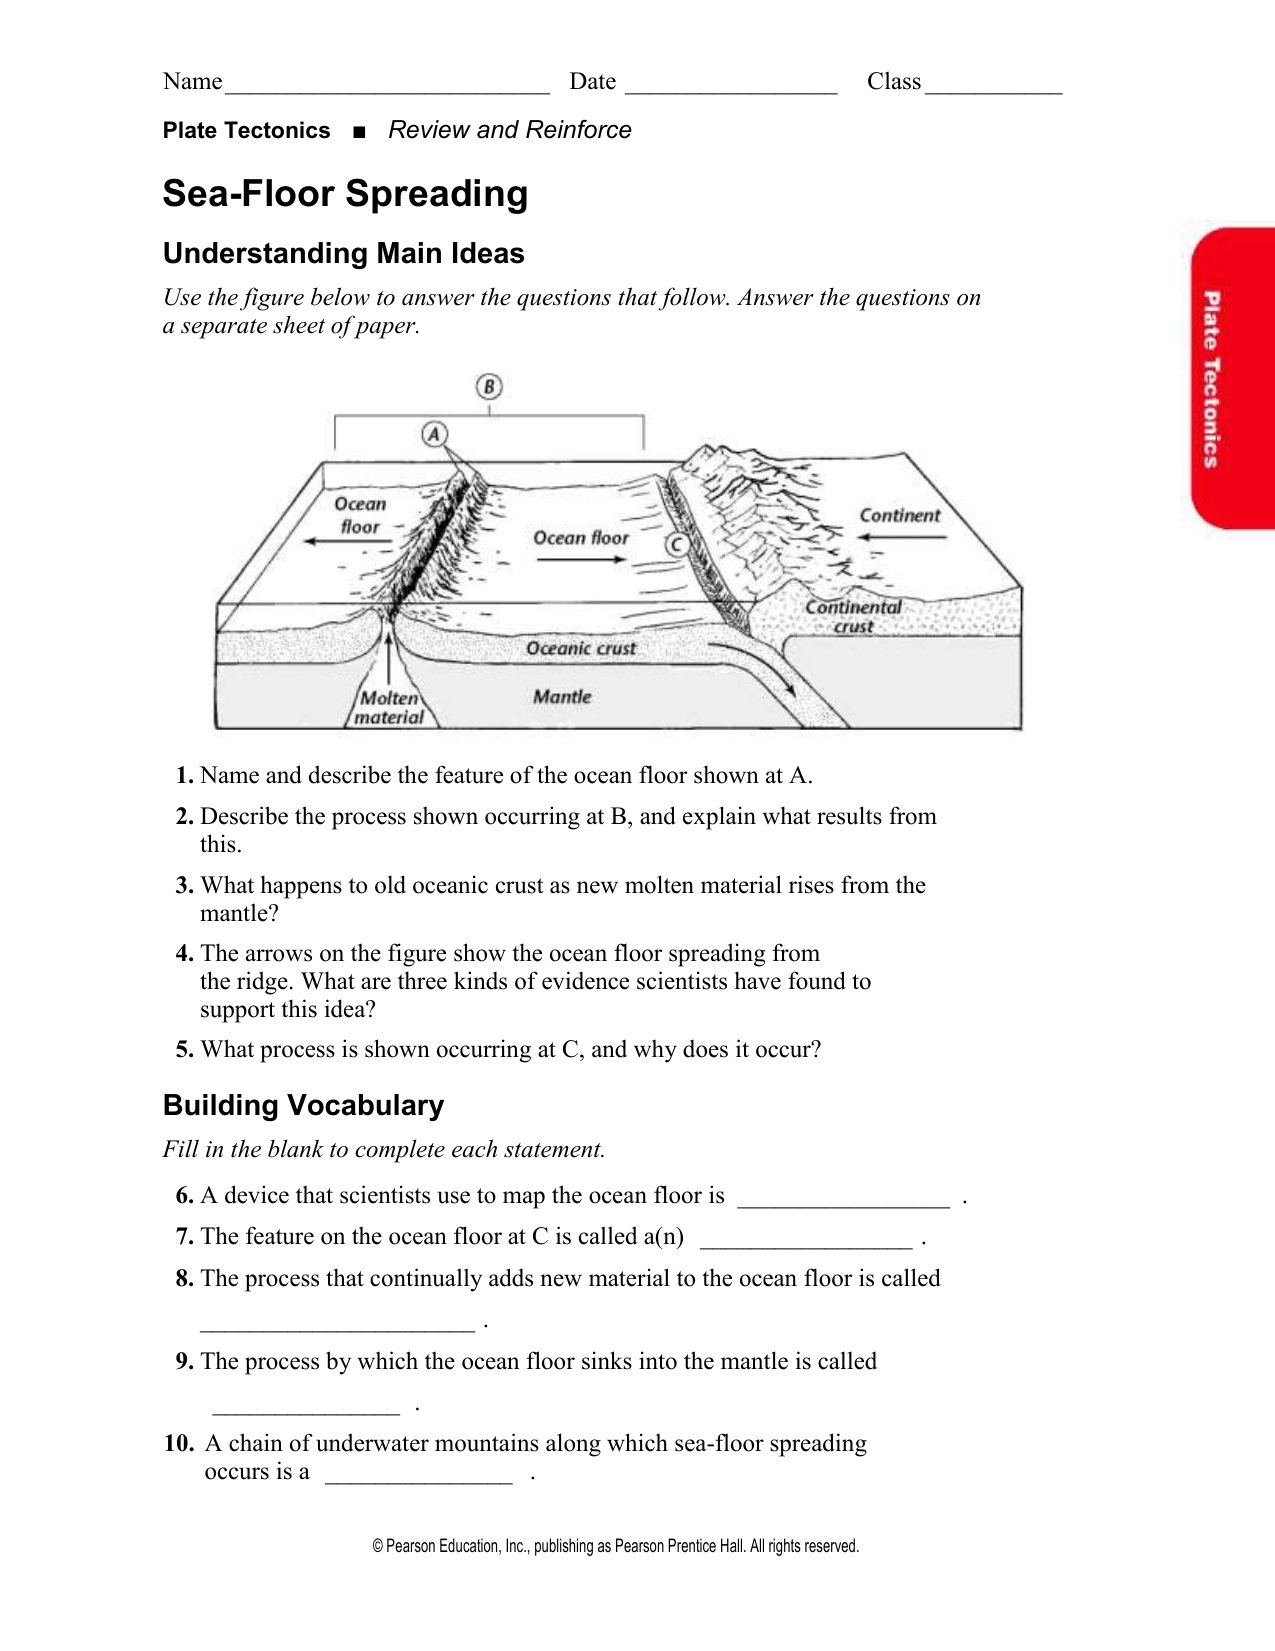 8-pics-sea-floor-spreading-worksheet-answer-key-pearson-education-and-review-alqu-blog